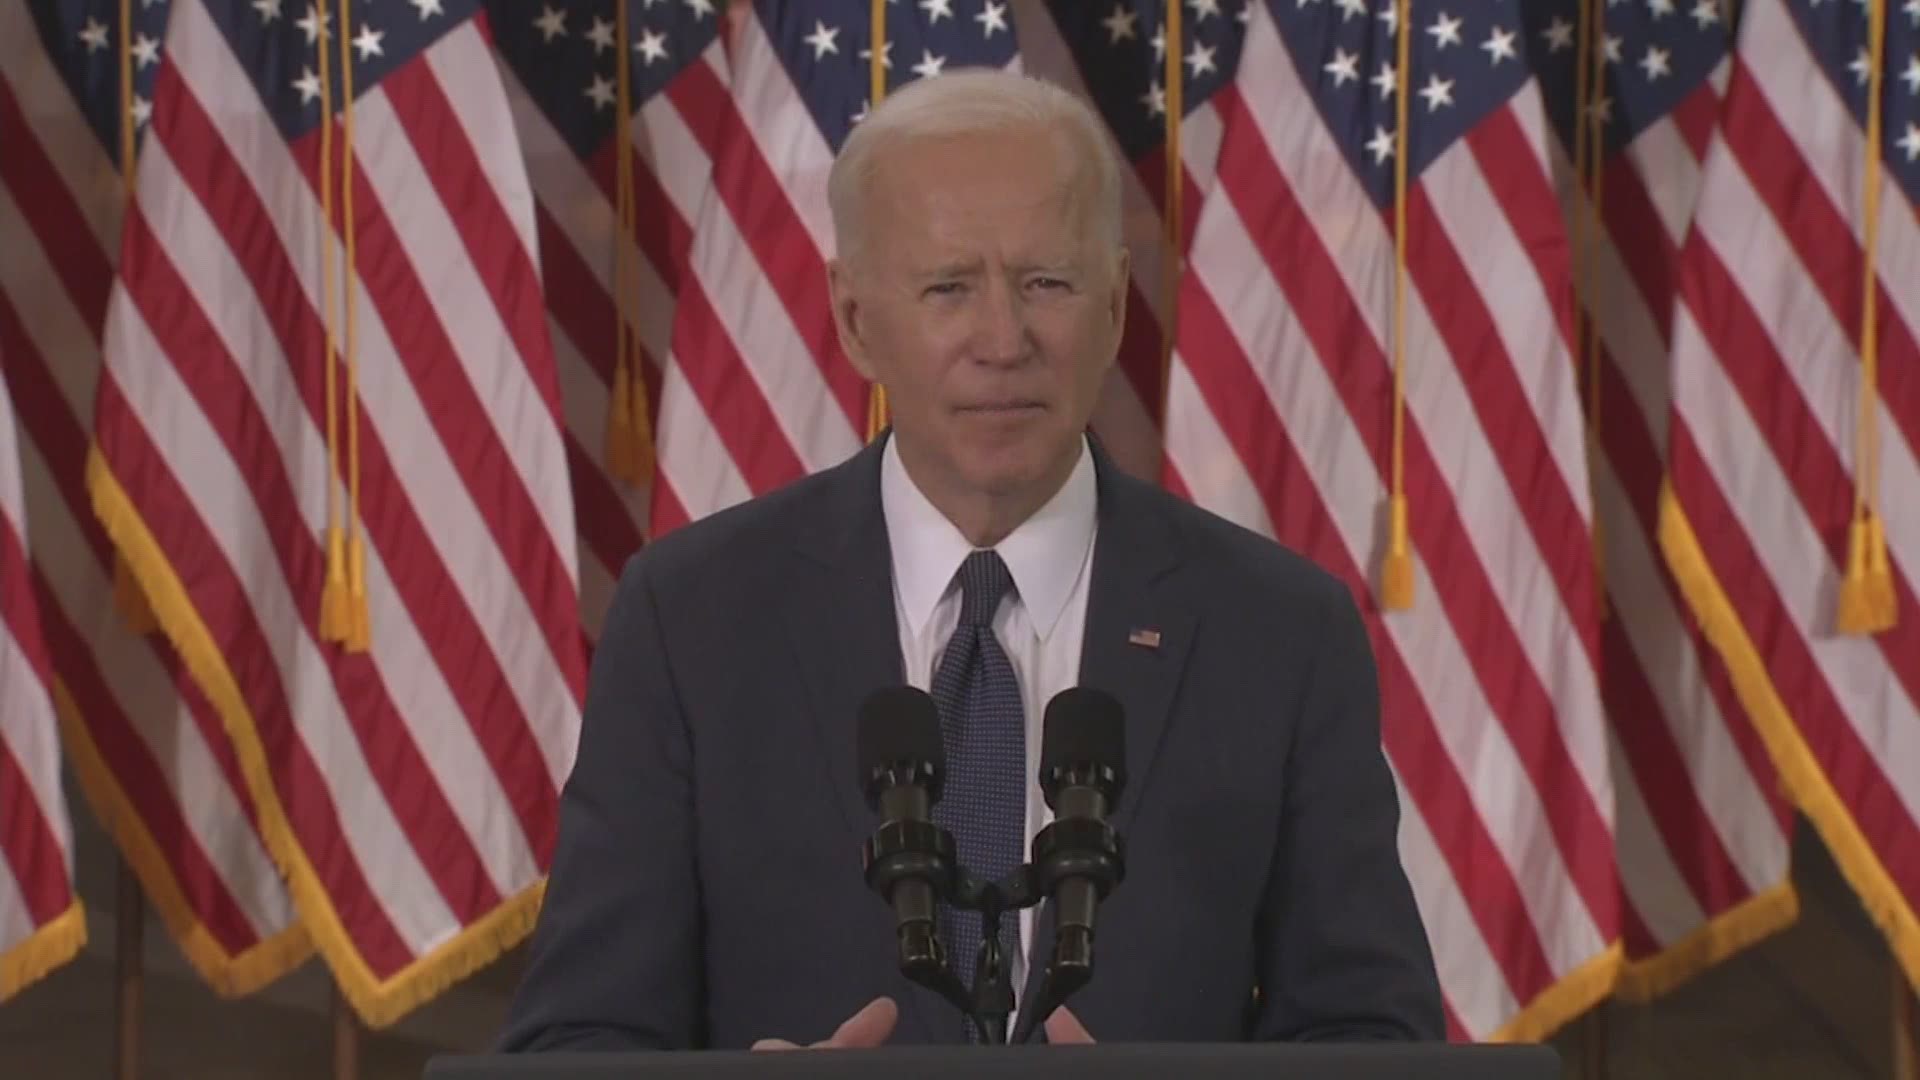 President Joe Biden wants $2 trillion to reengineer America’s infrastructure and expects the nation’s corporations to pay for it.